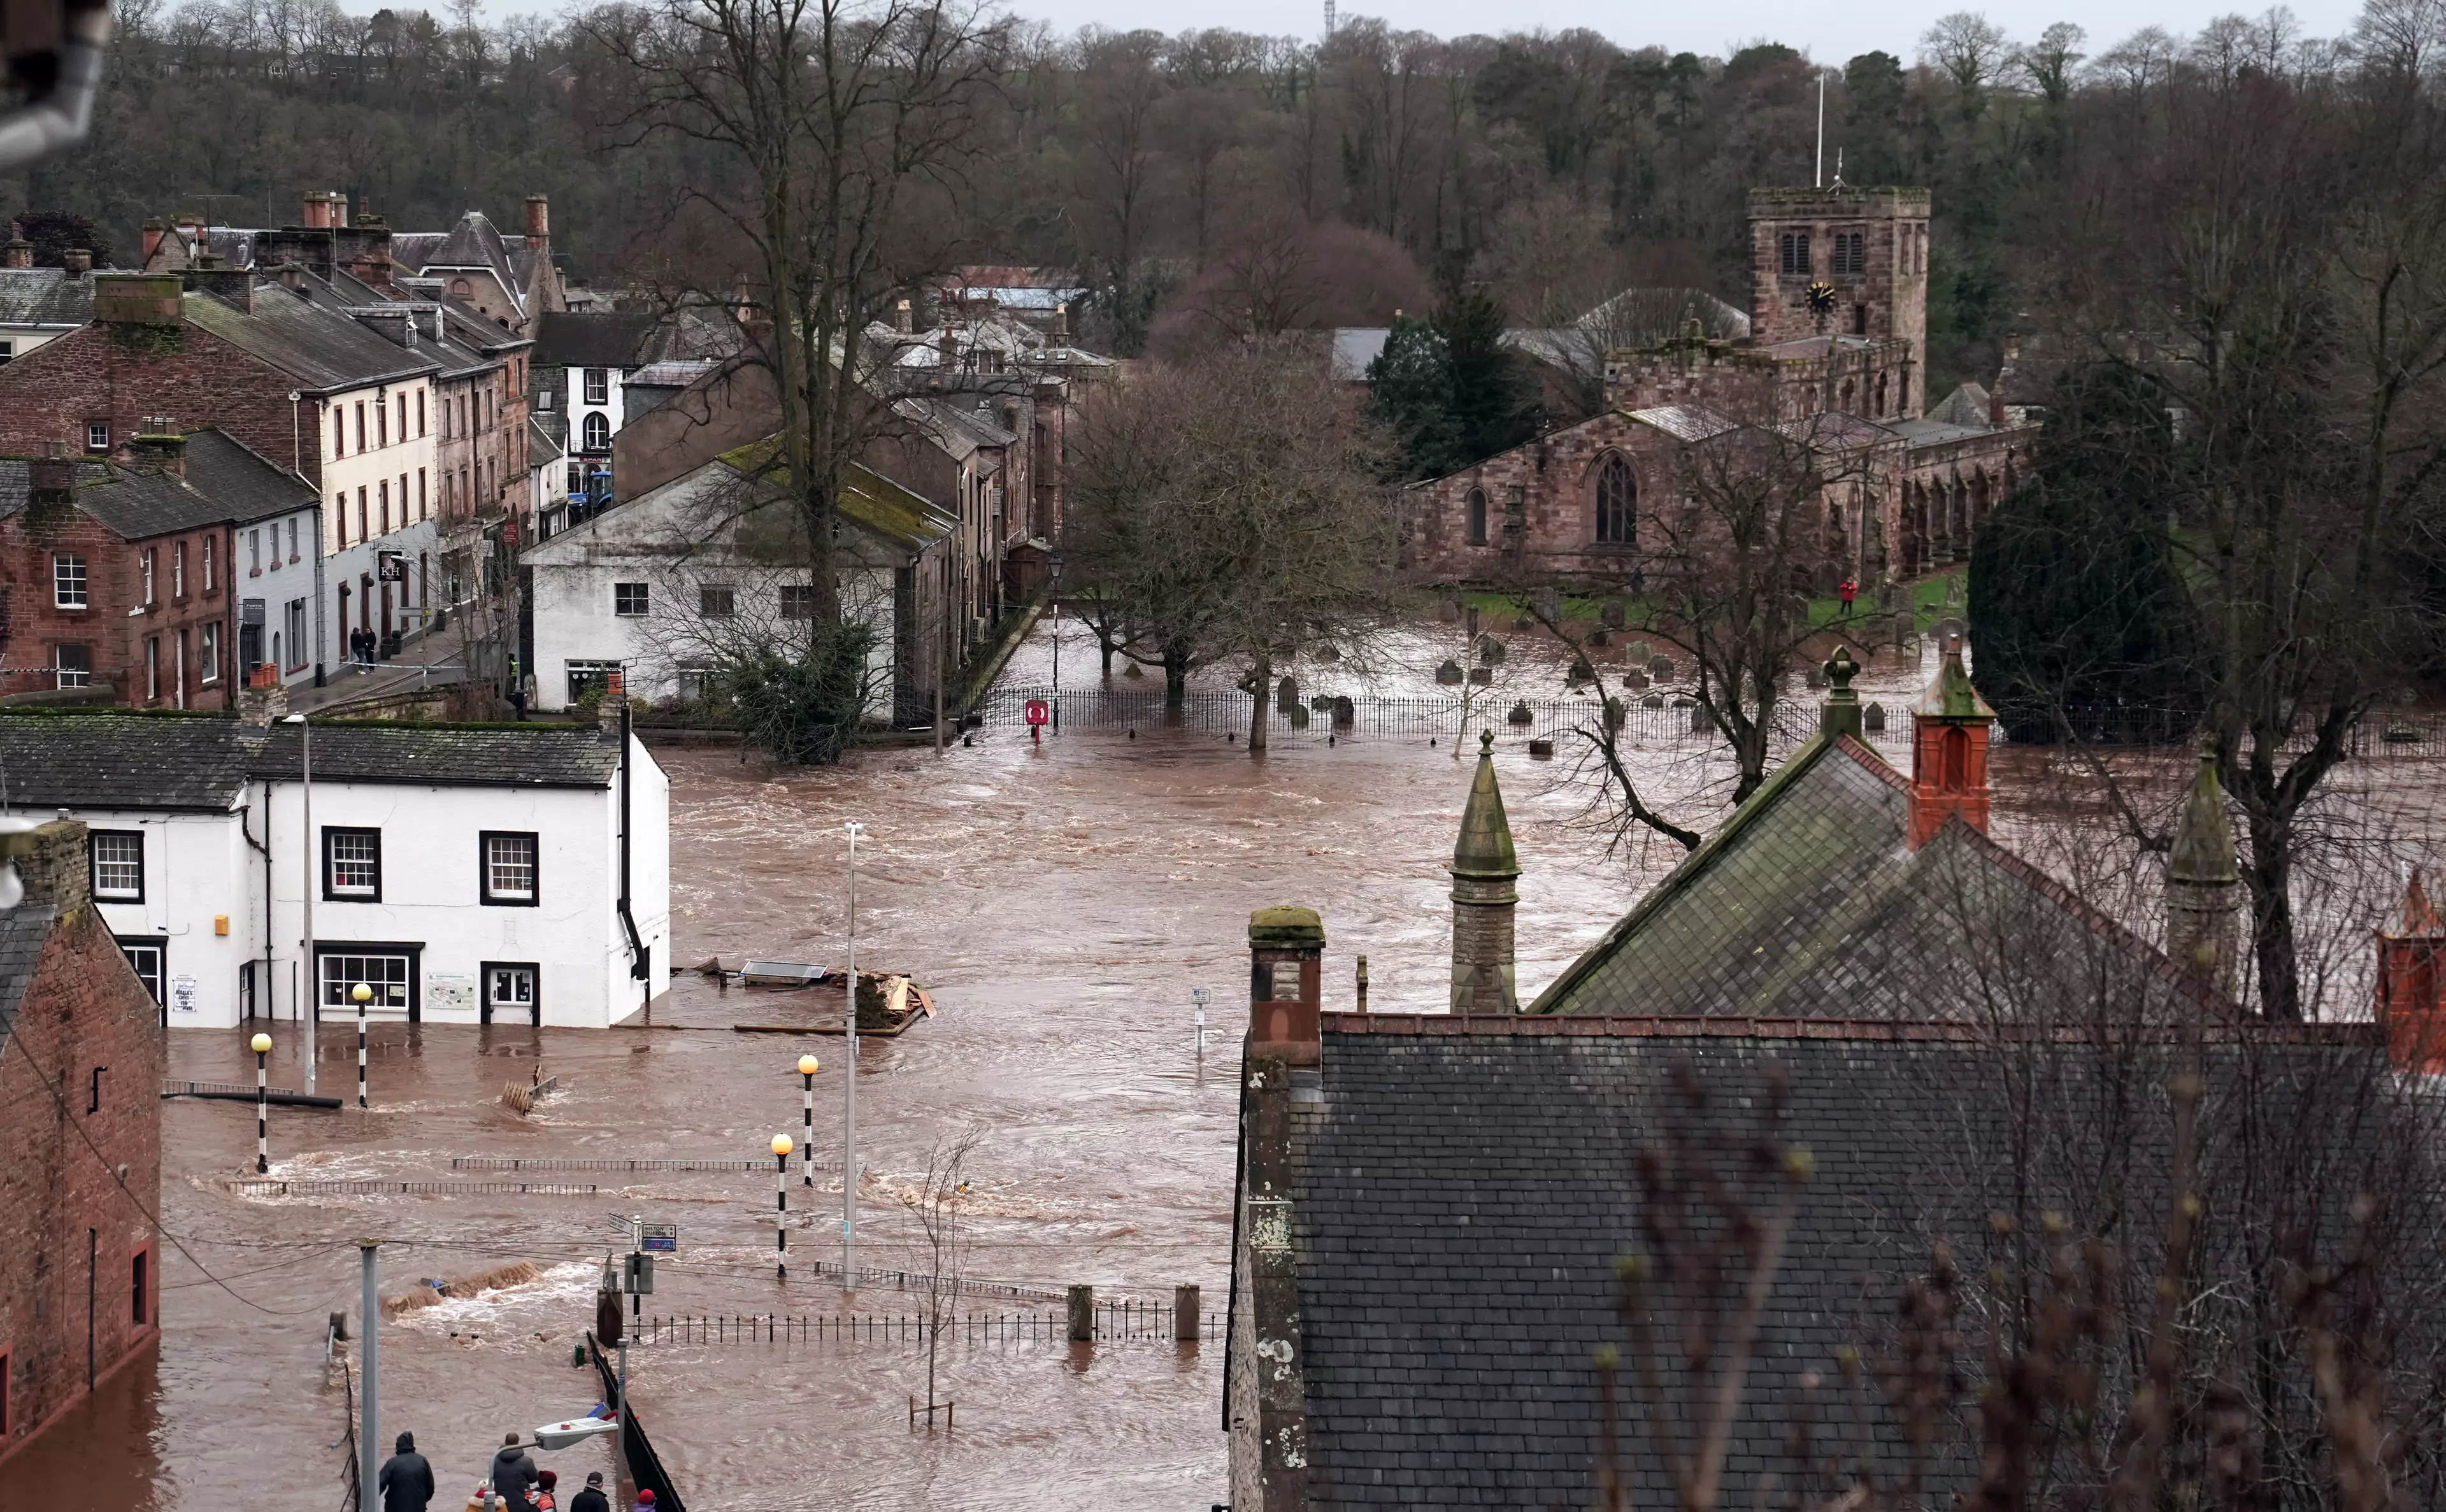 Appleby-in-Westmorland, Cumbria is already suffering from flooding from Storm Ciara.